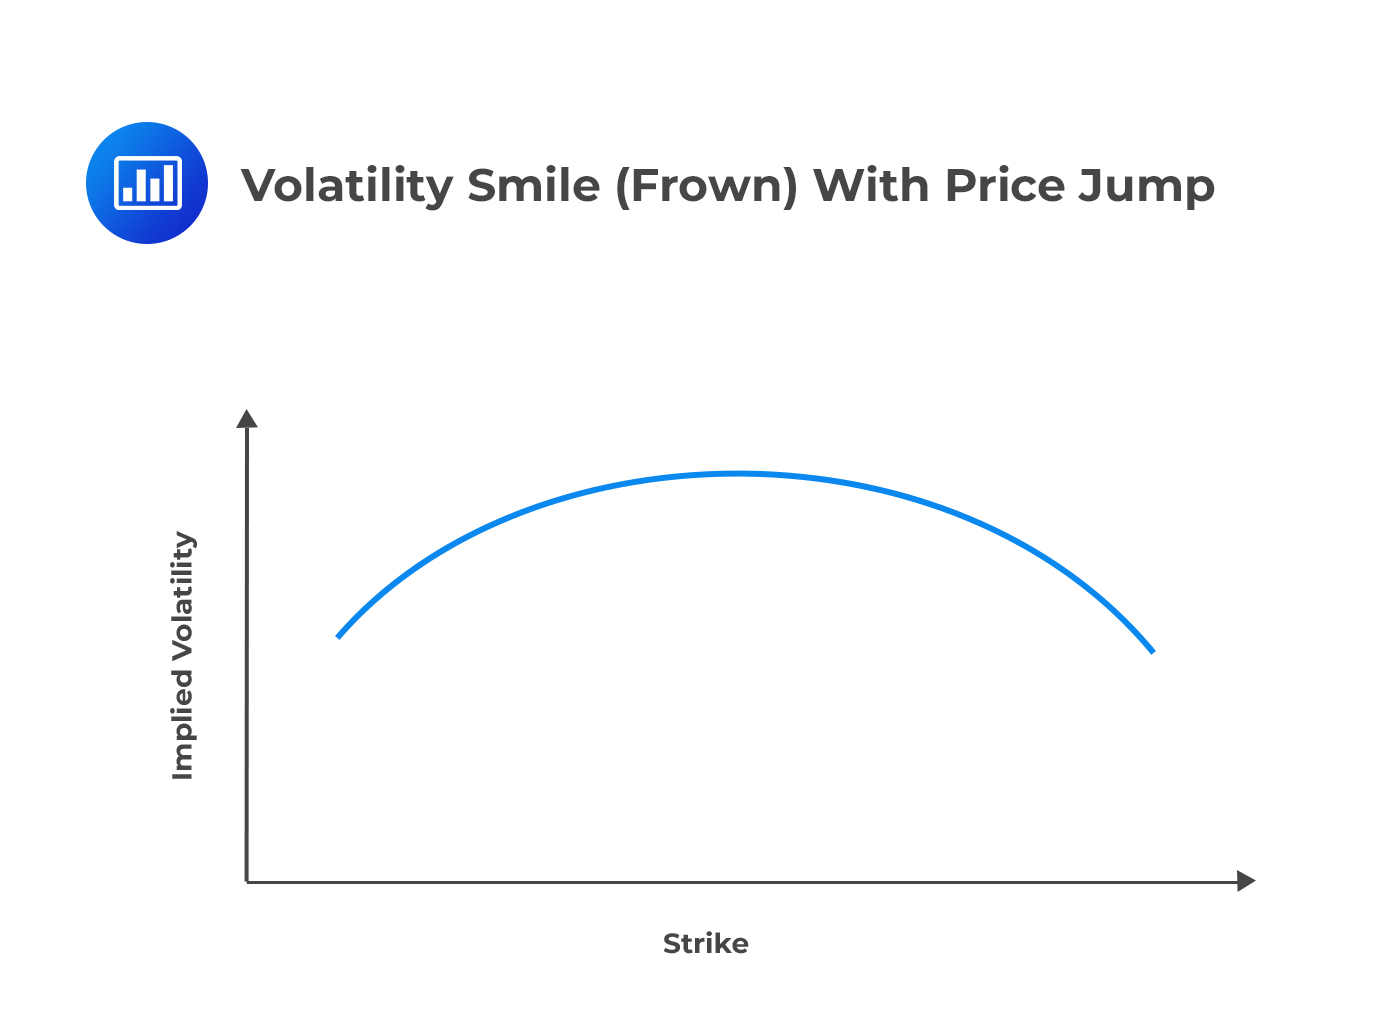 Volatility Smile (Frown) With Price Jump